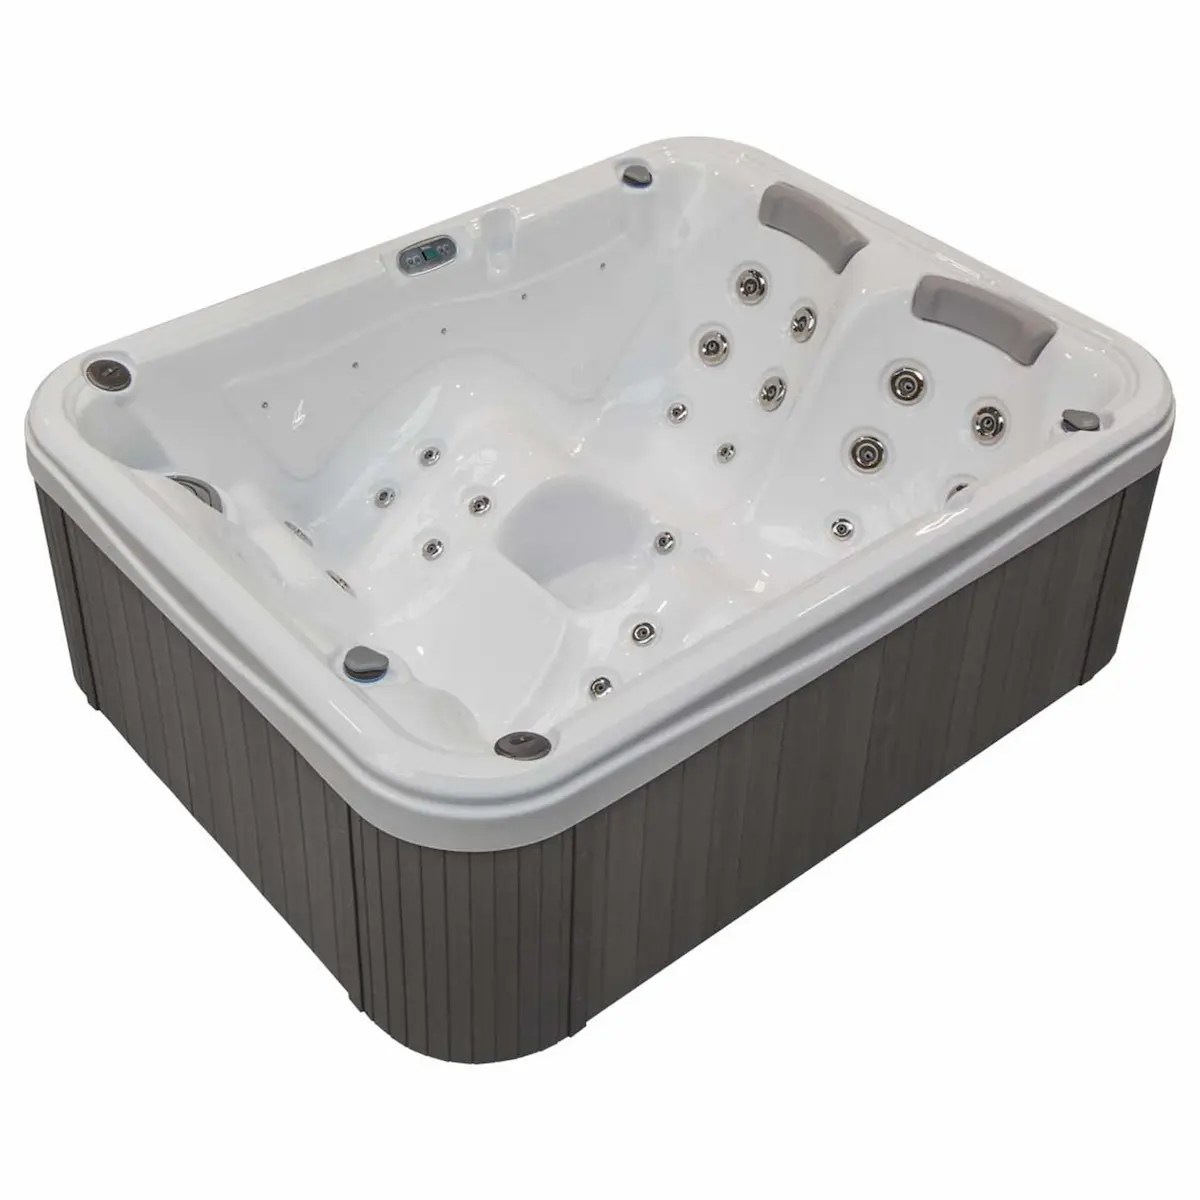 Orion Hot Tub Side View